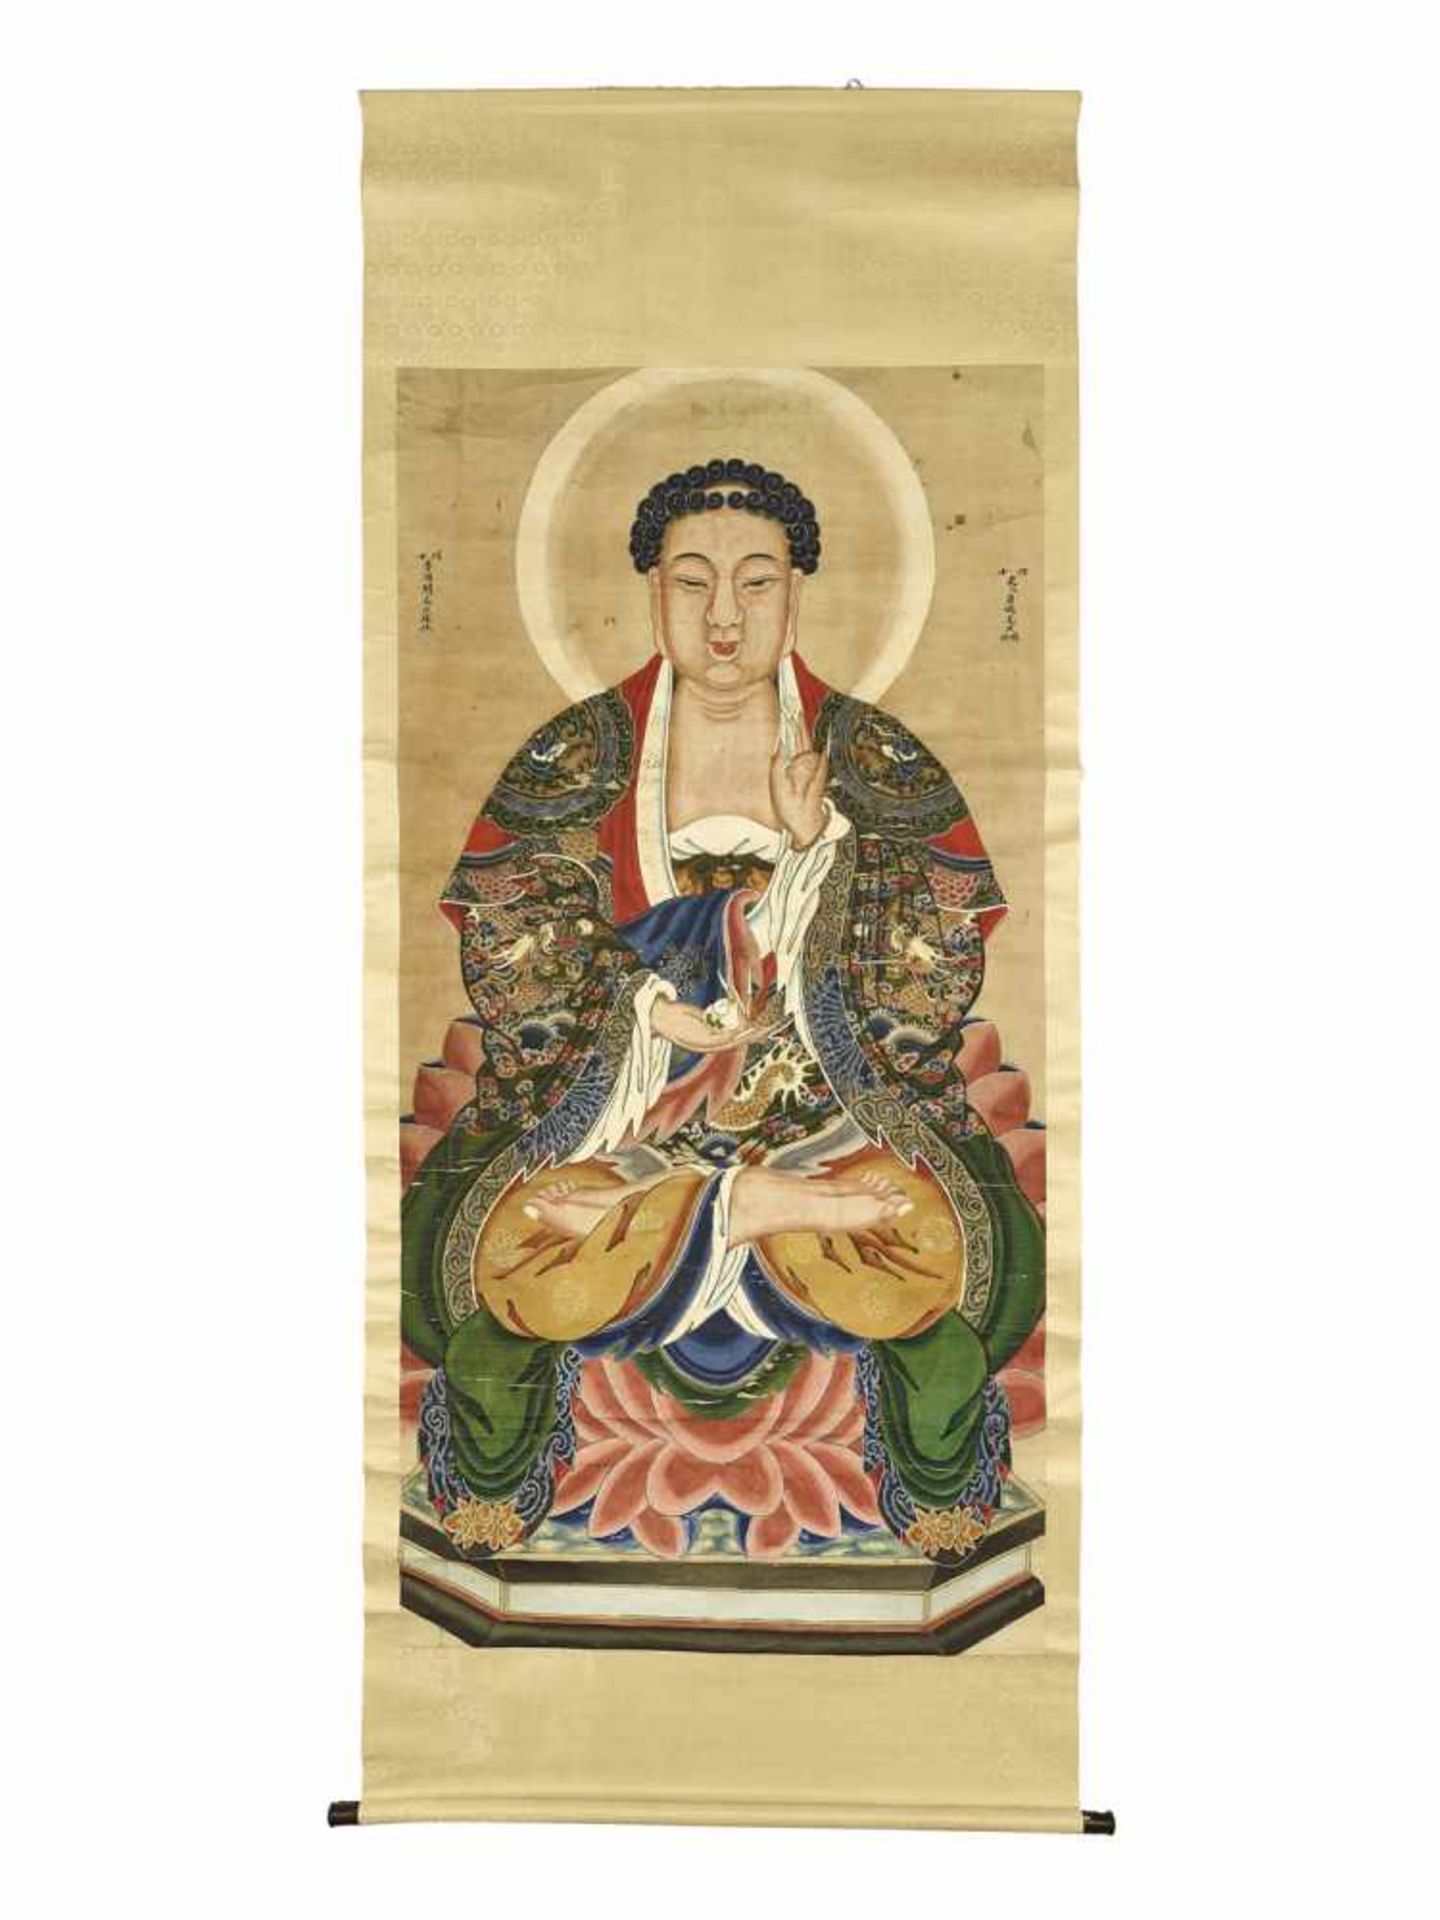 A PAINTING OF BUDDHA, QING